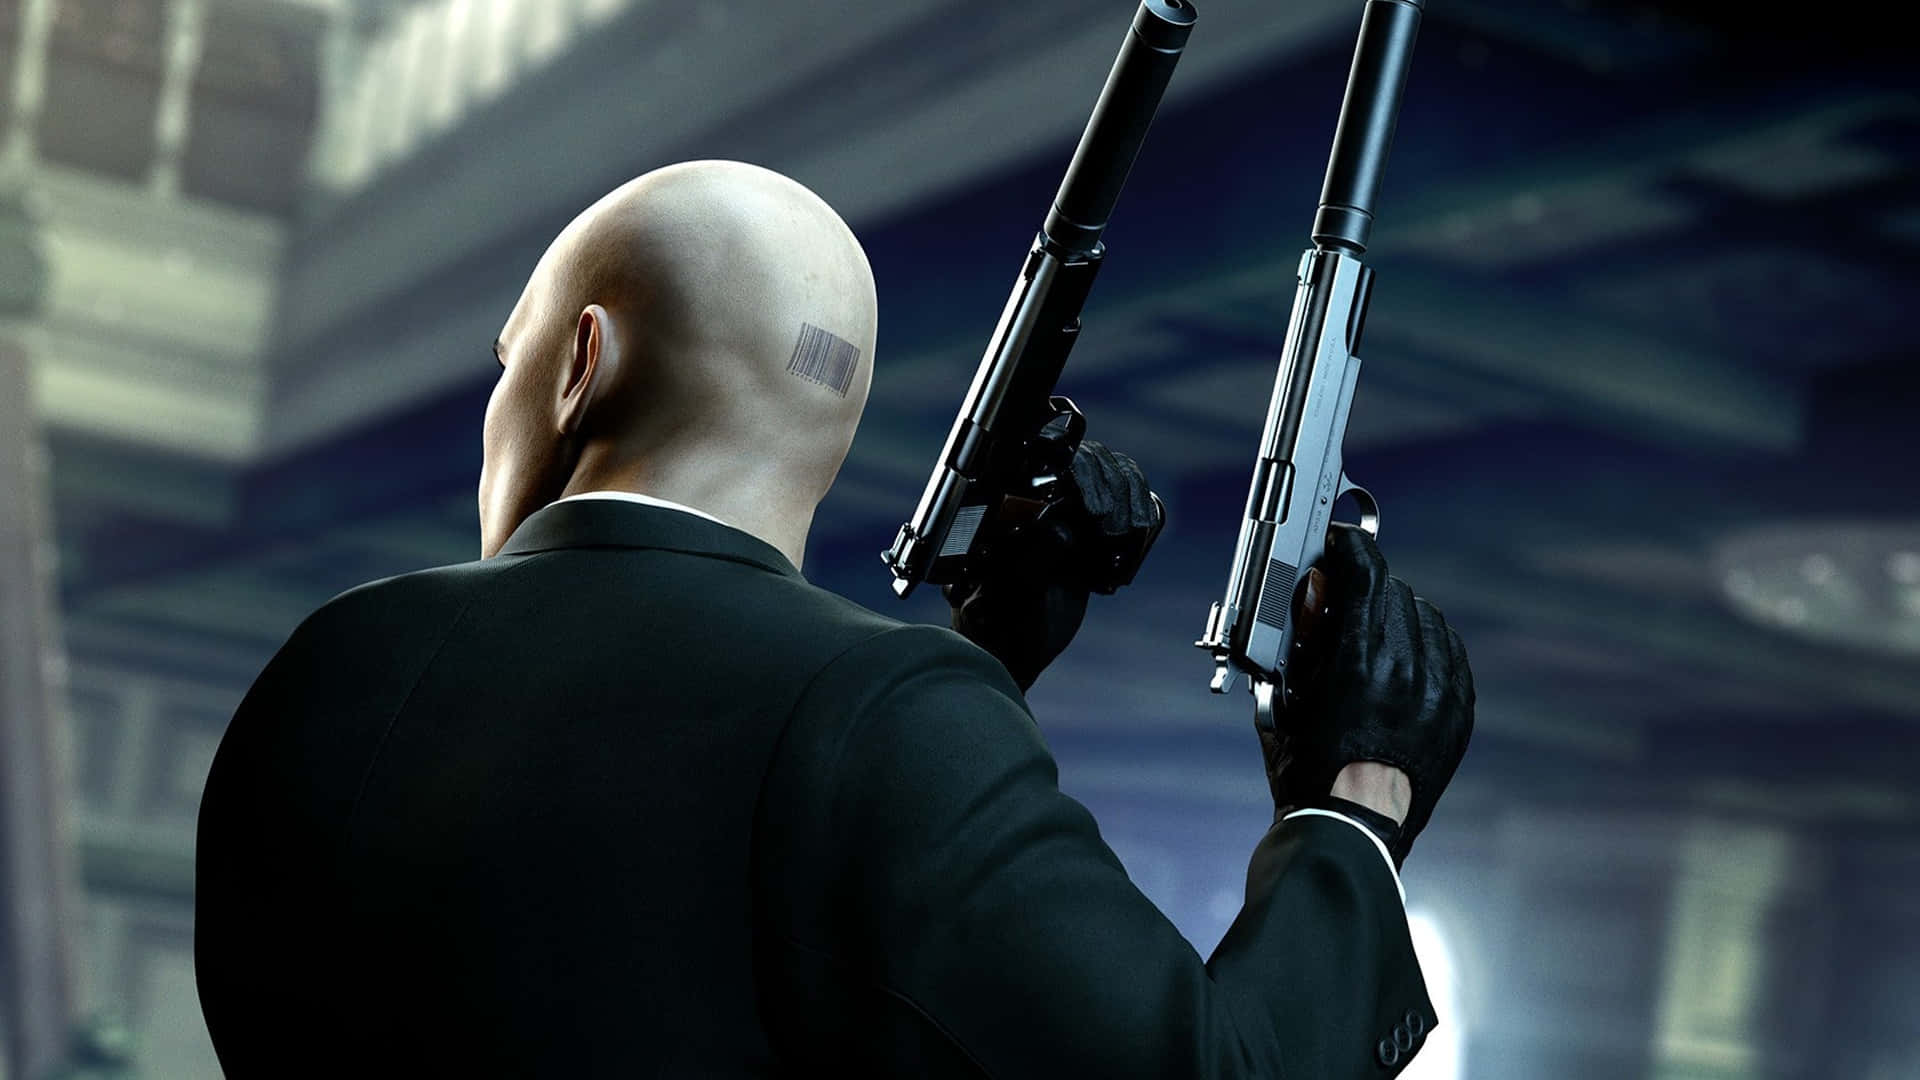 Take on the ultimate assassin mission with Hitman Absolution